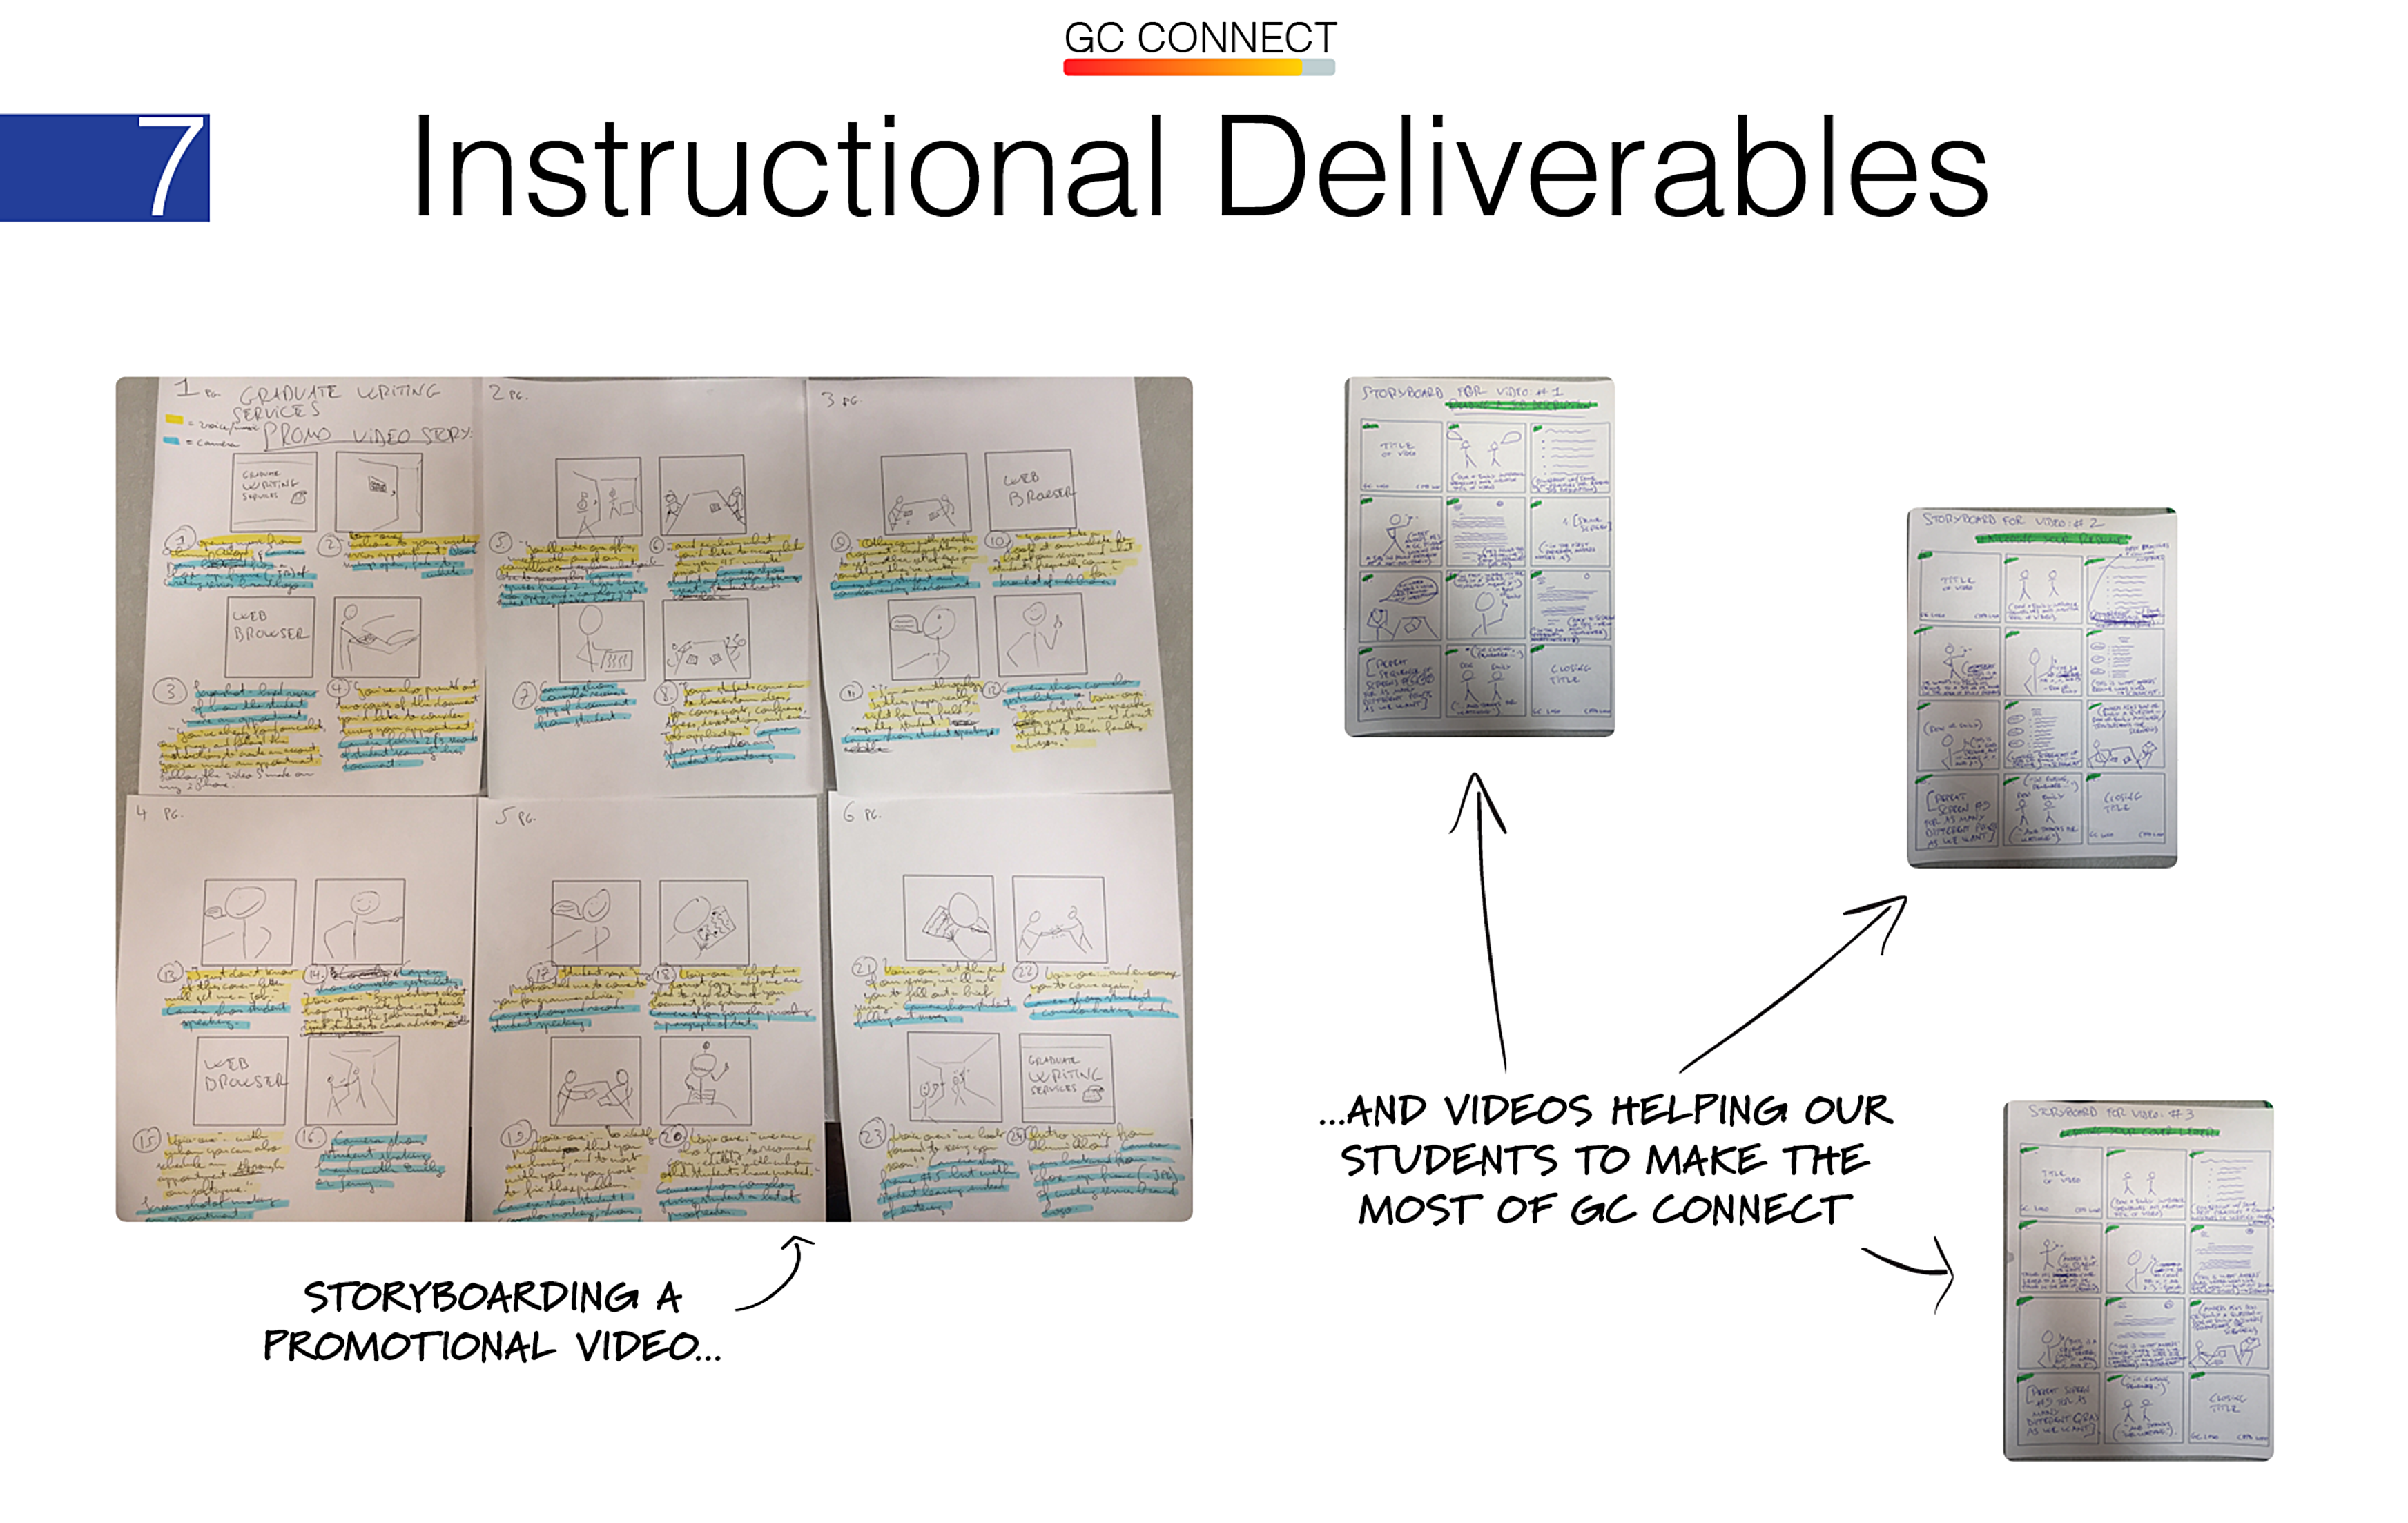 developing instructional deliverables including walkthroughs, tutorials, and how-to guides to improve student success rates